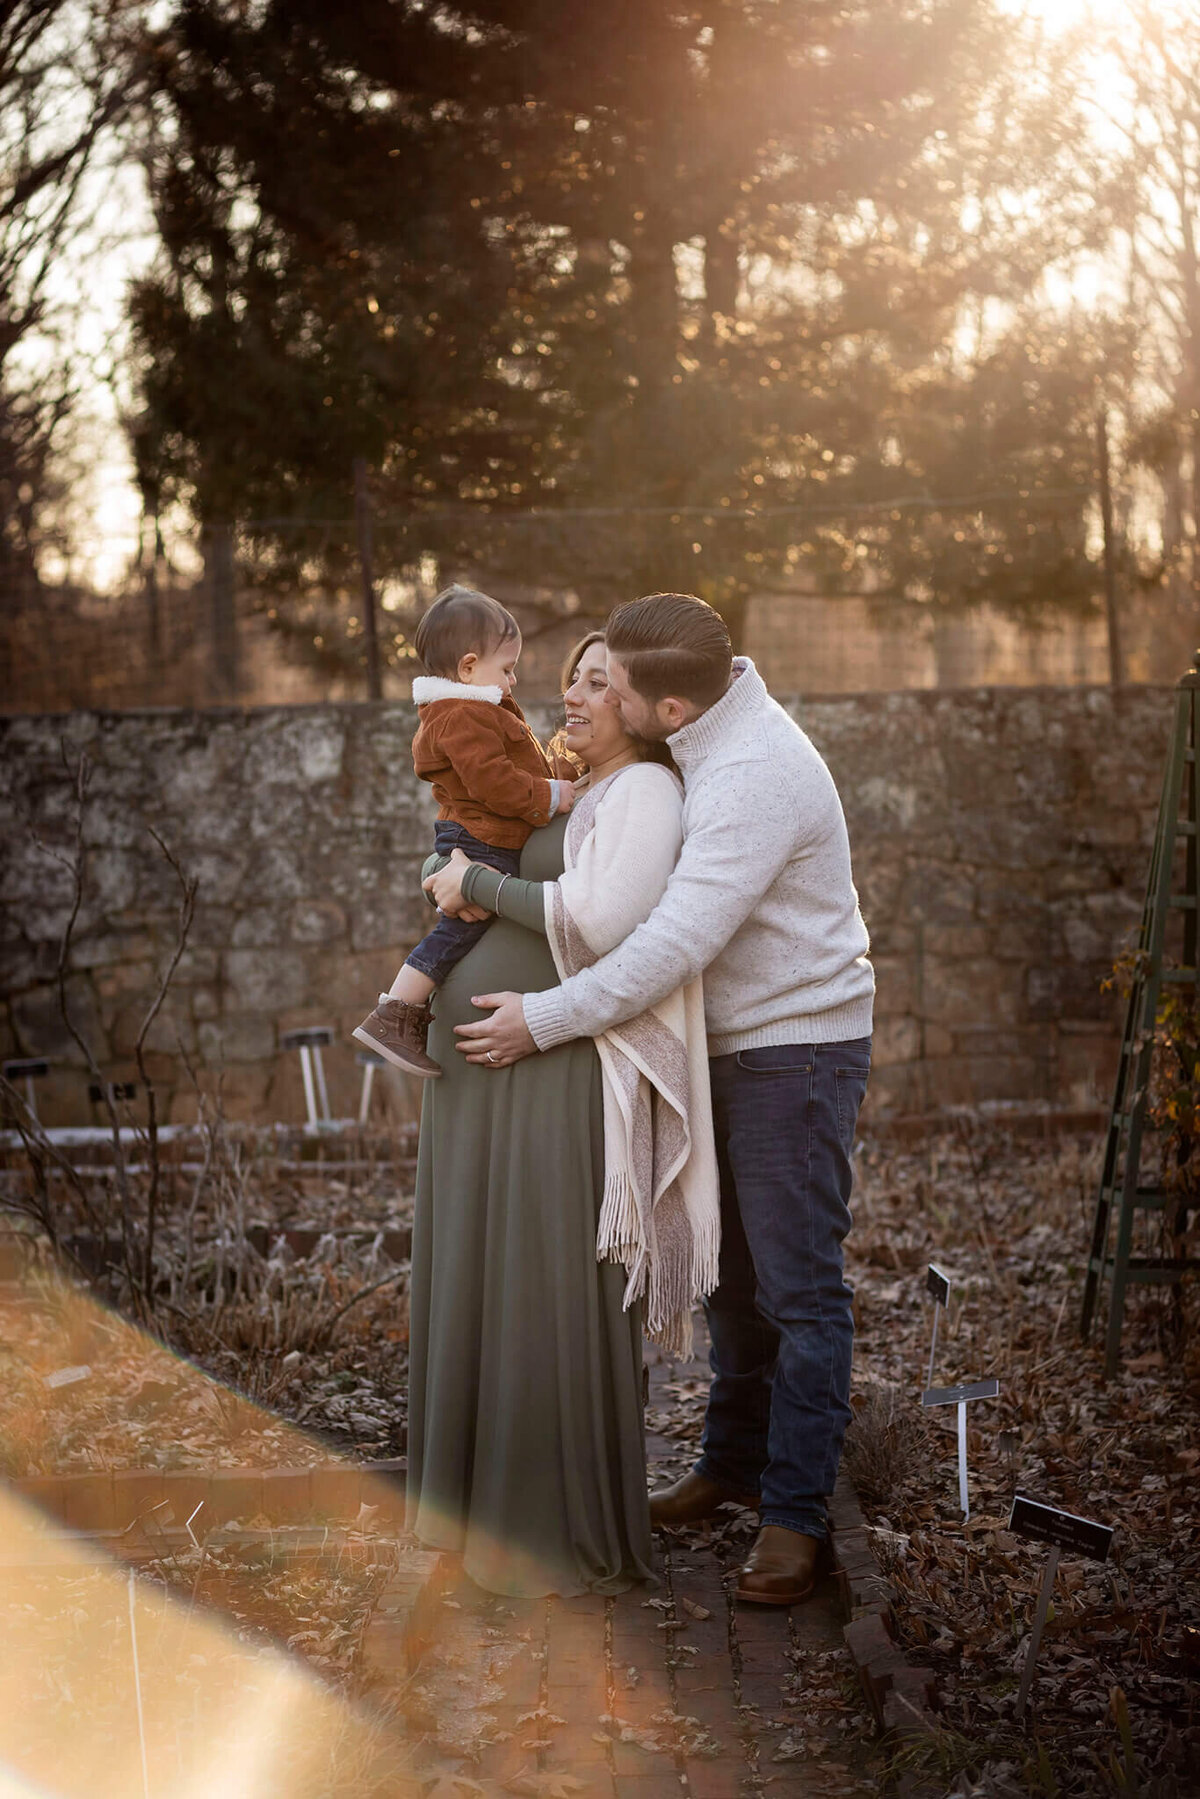 NJ maternity photographer captures family playing together in garden